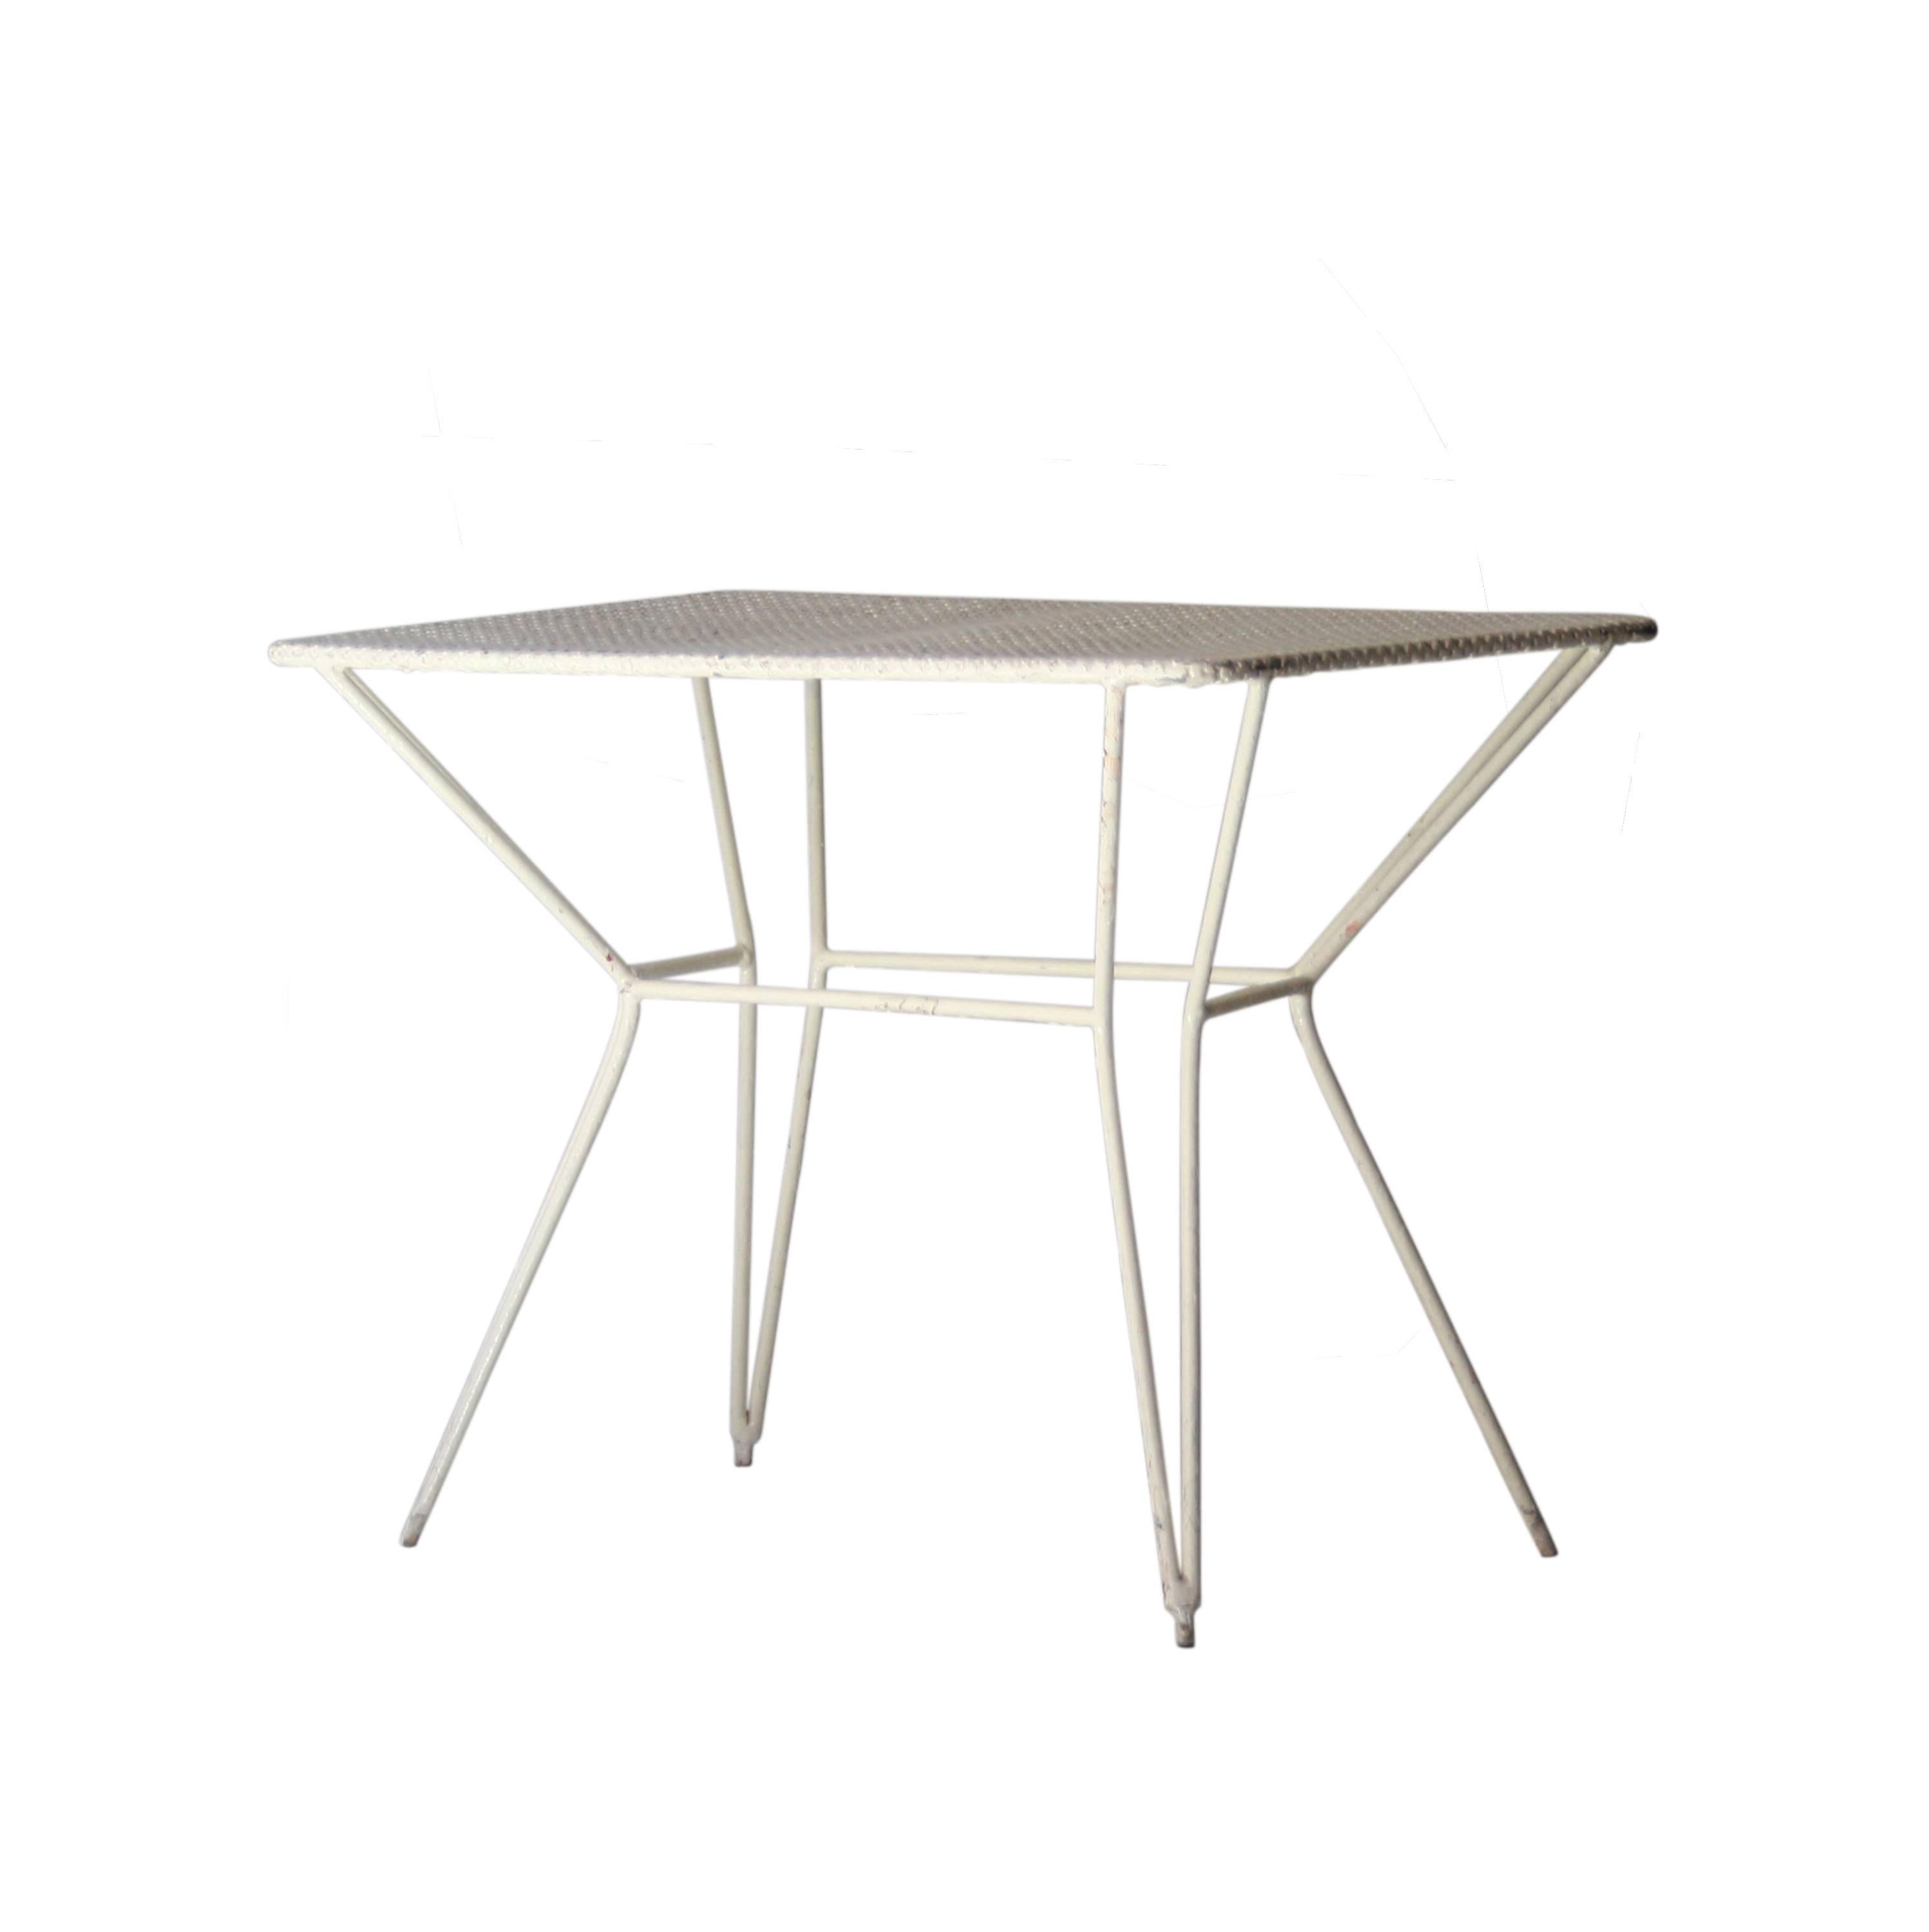 Pair of rectangular side tables with white lacquered solid iron structure and perforated plate top.